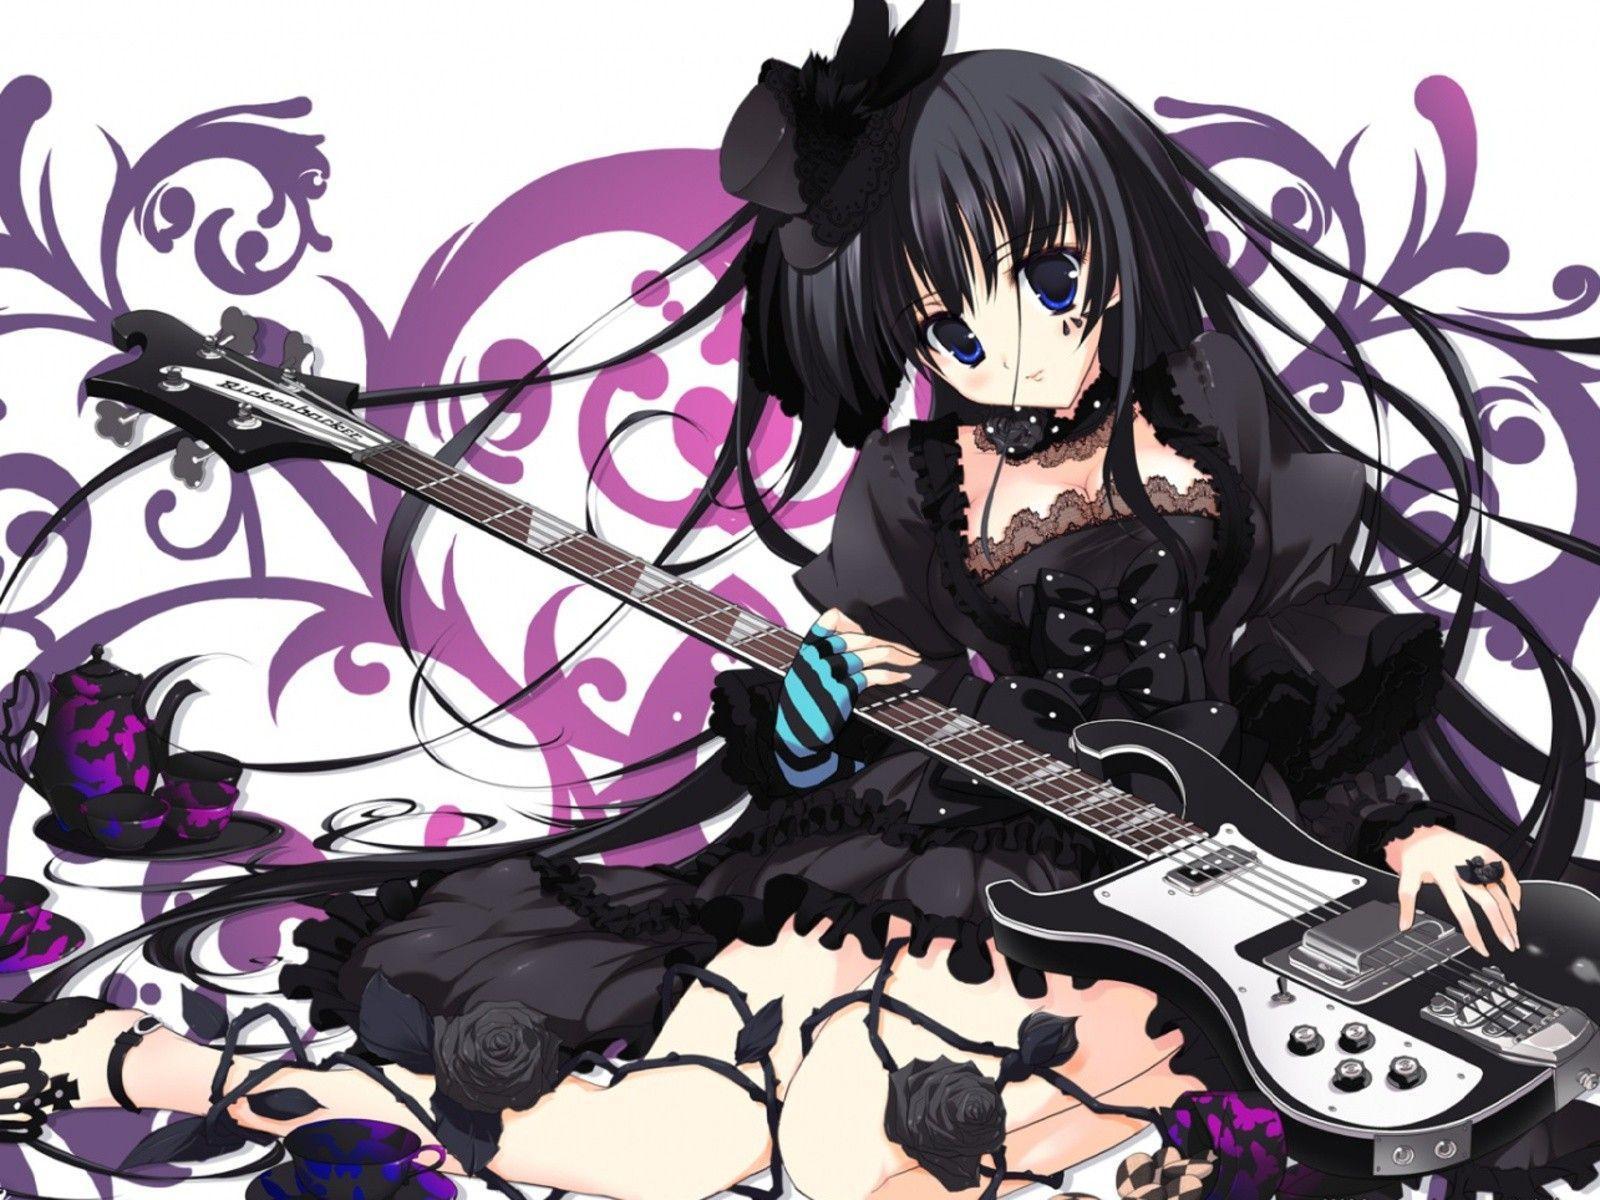 image For > Anime Gothic Girl